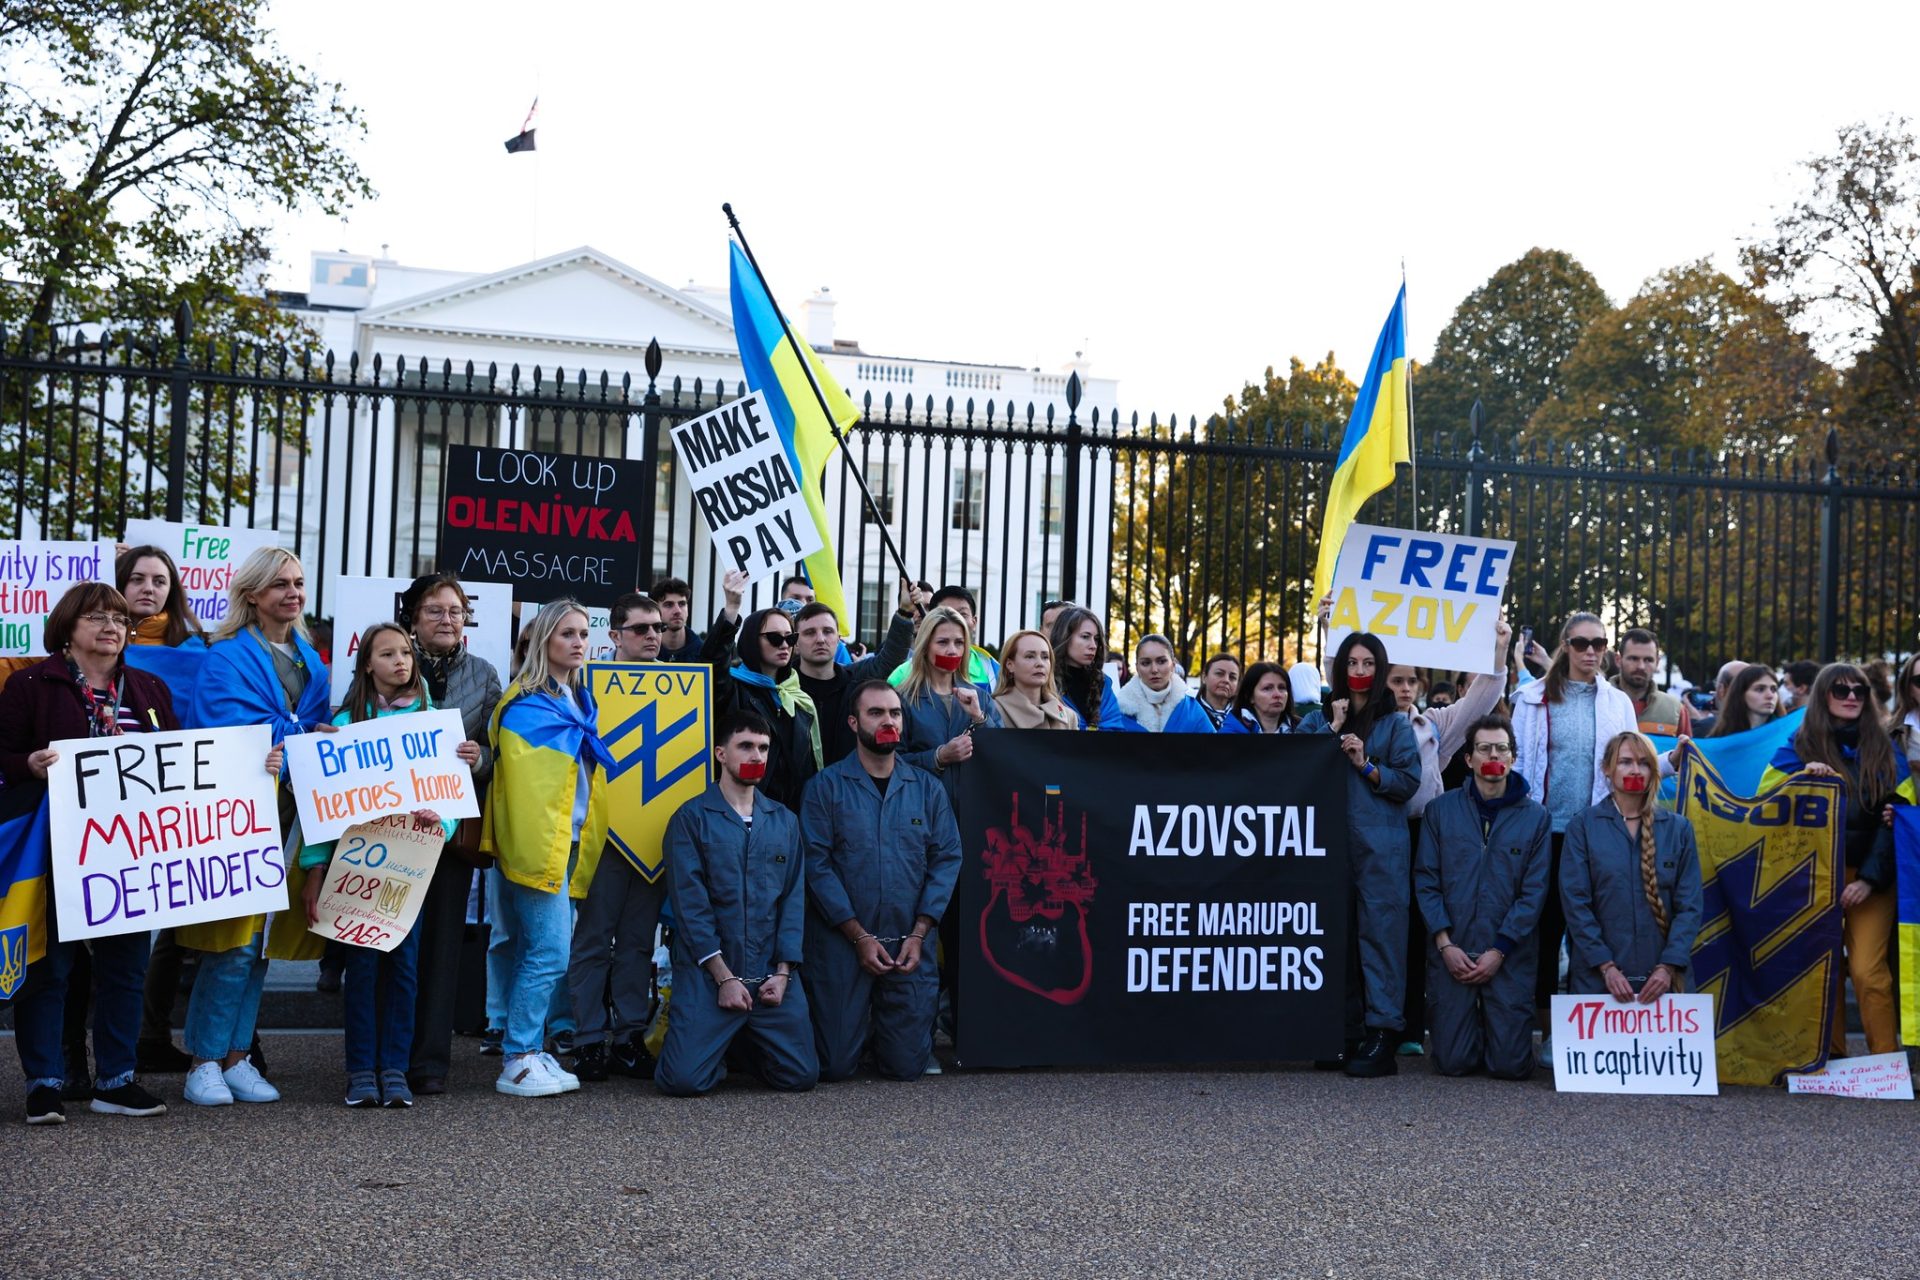 “Free Mariupol Defenders” rally in front of the White House in Washington DC